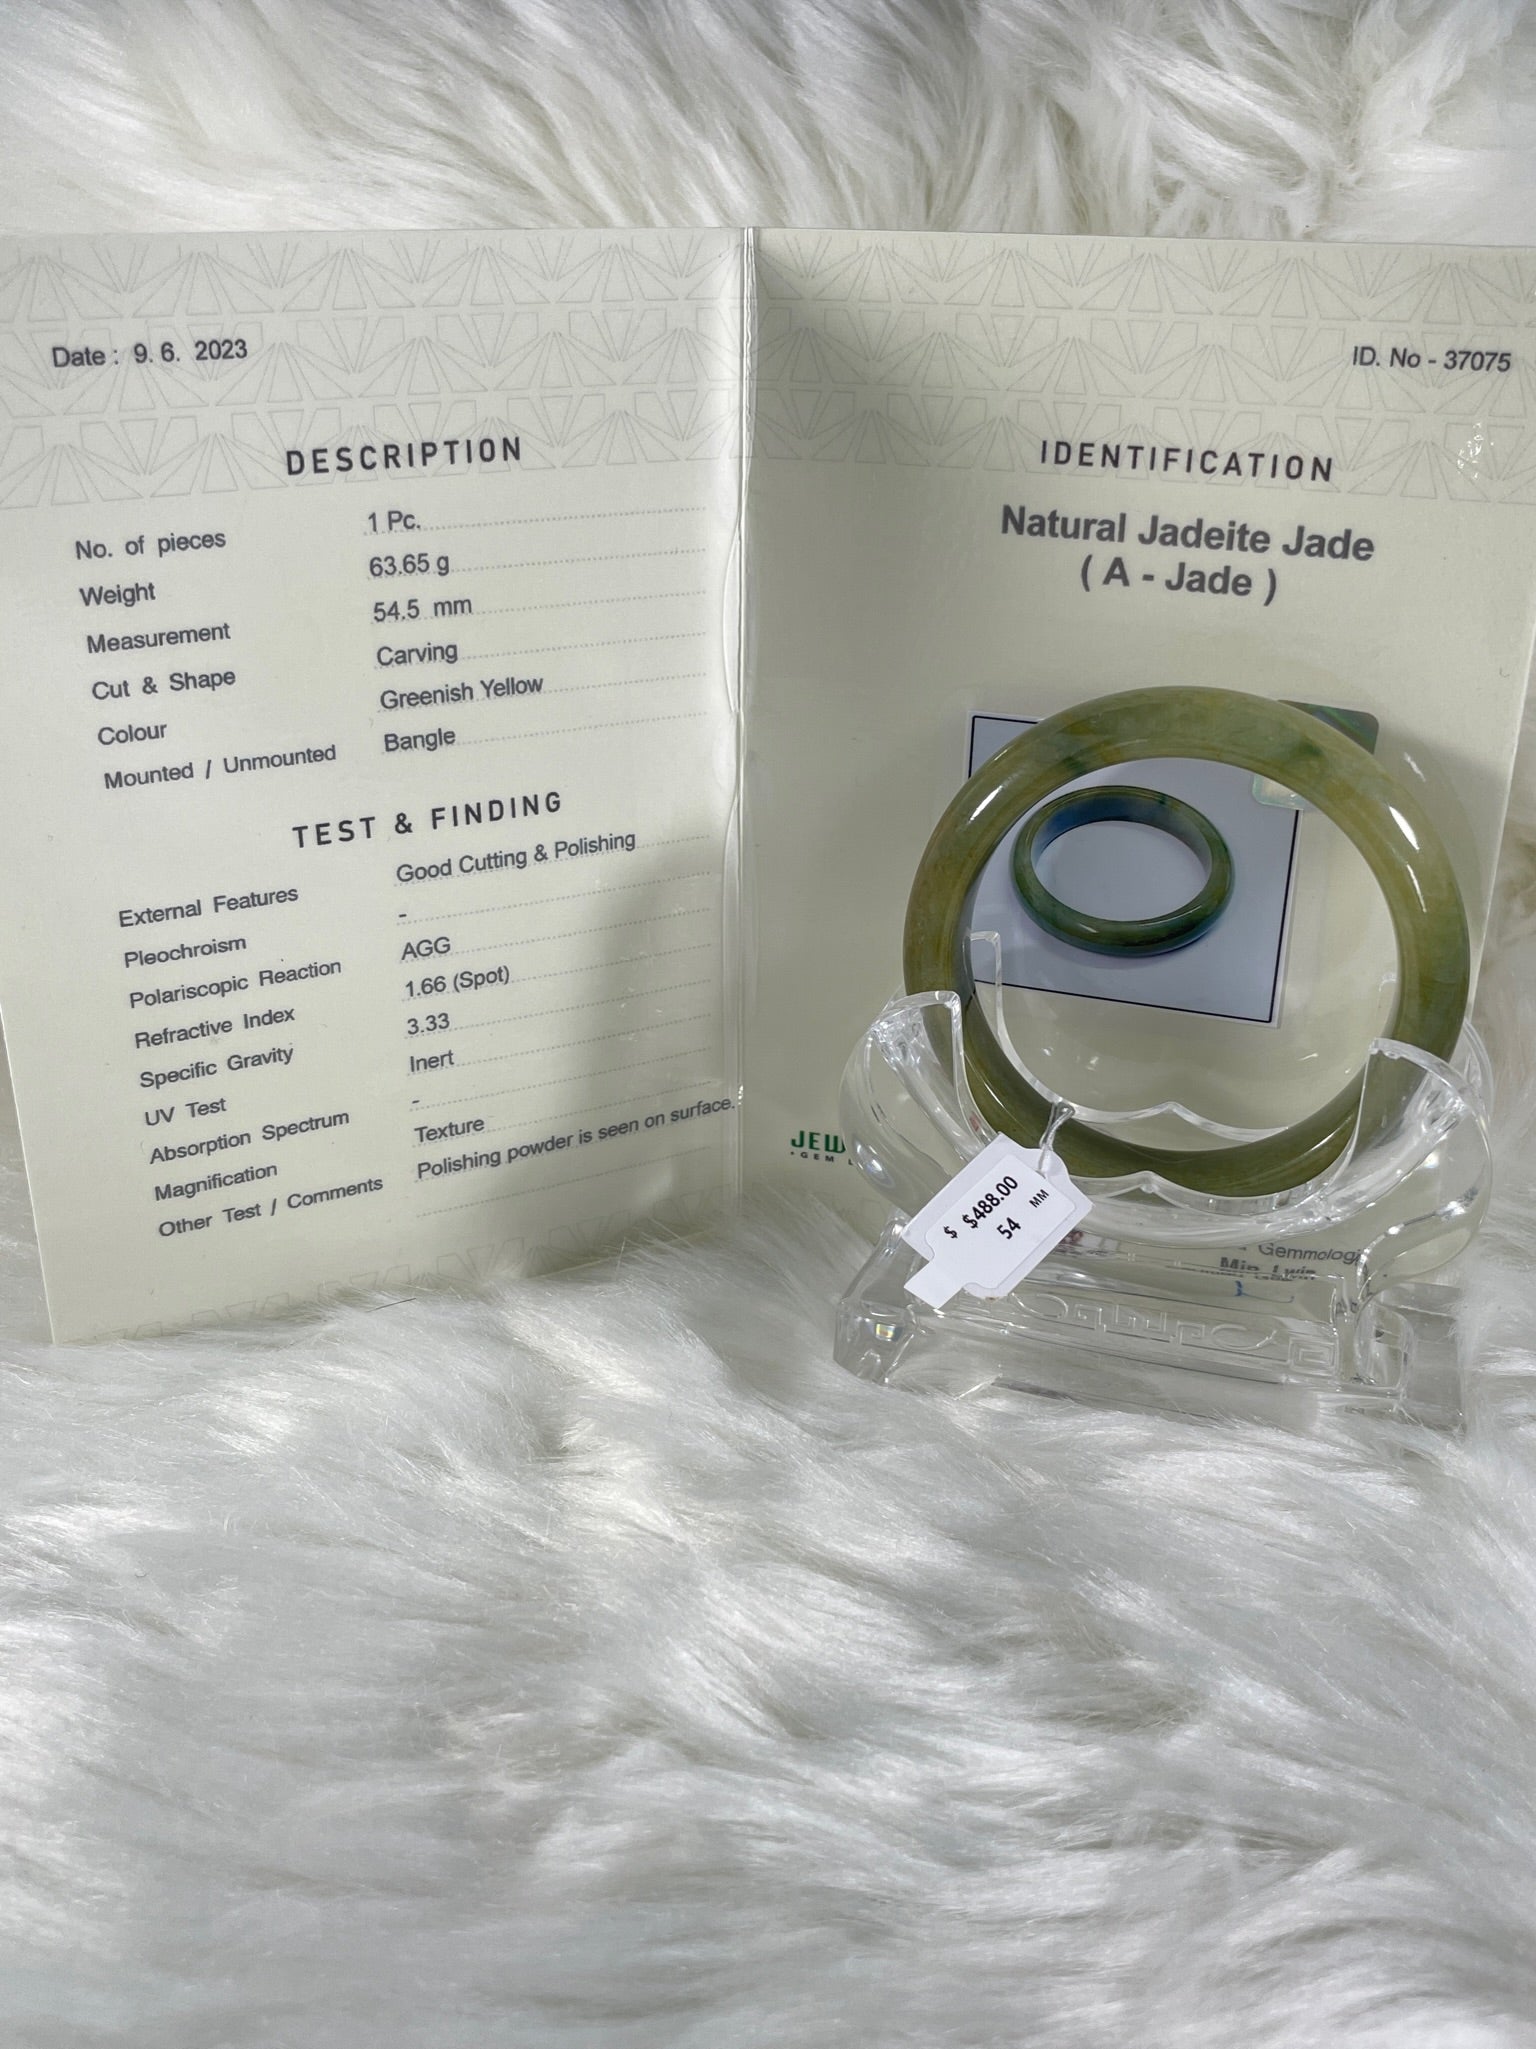 Grade A Natural Jade Bangle with certificate #37075